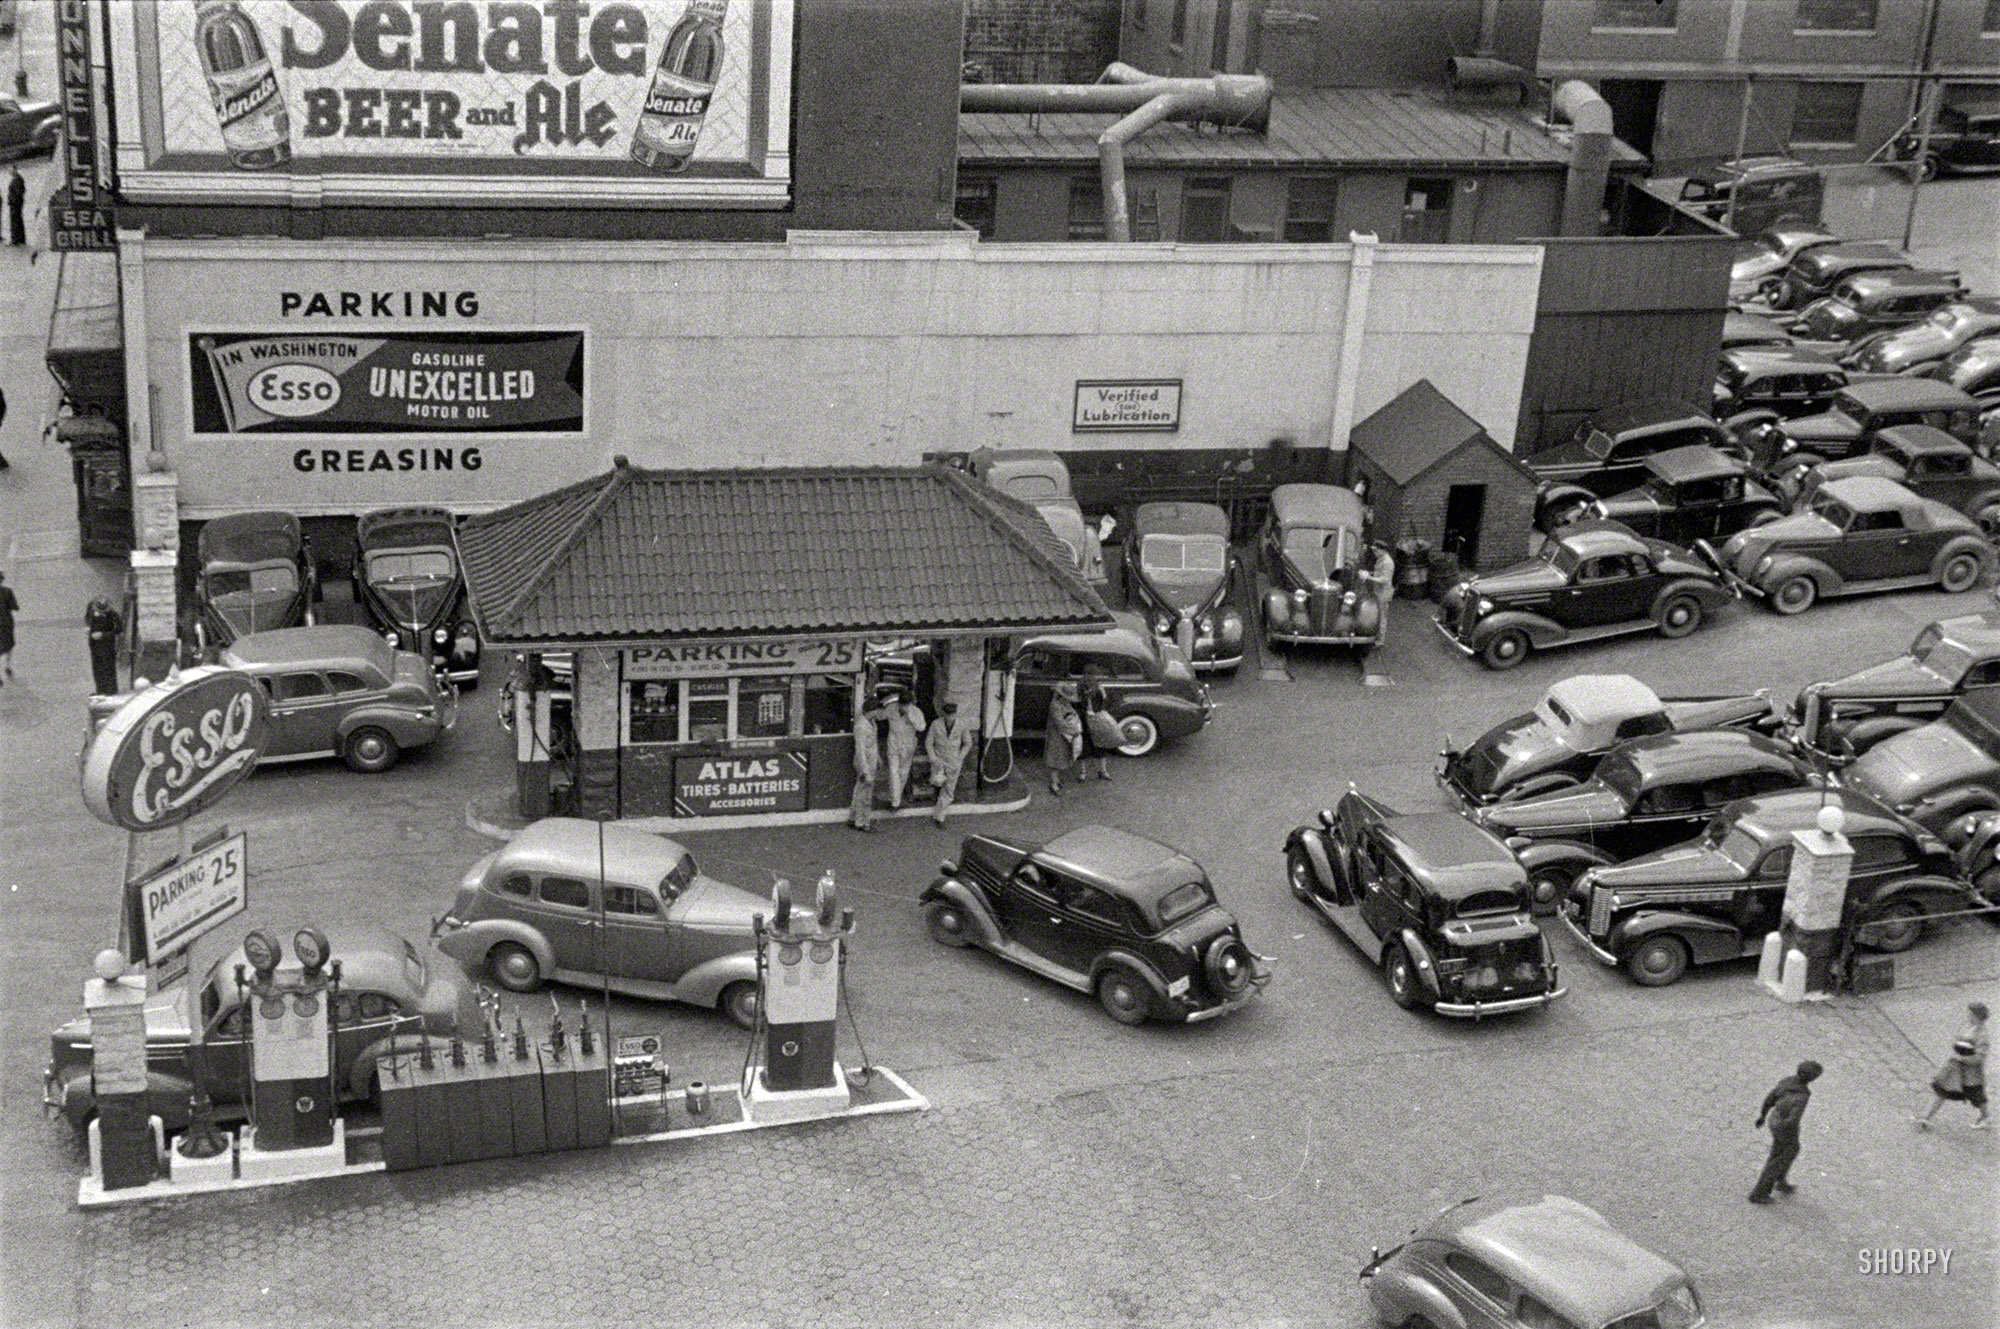 1939. "Service station in Washington, D.C." Continuing today's Essorama. 35mm nitrate negative by David Myers. View full size.